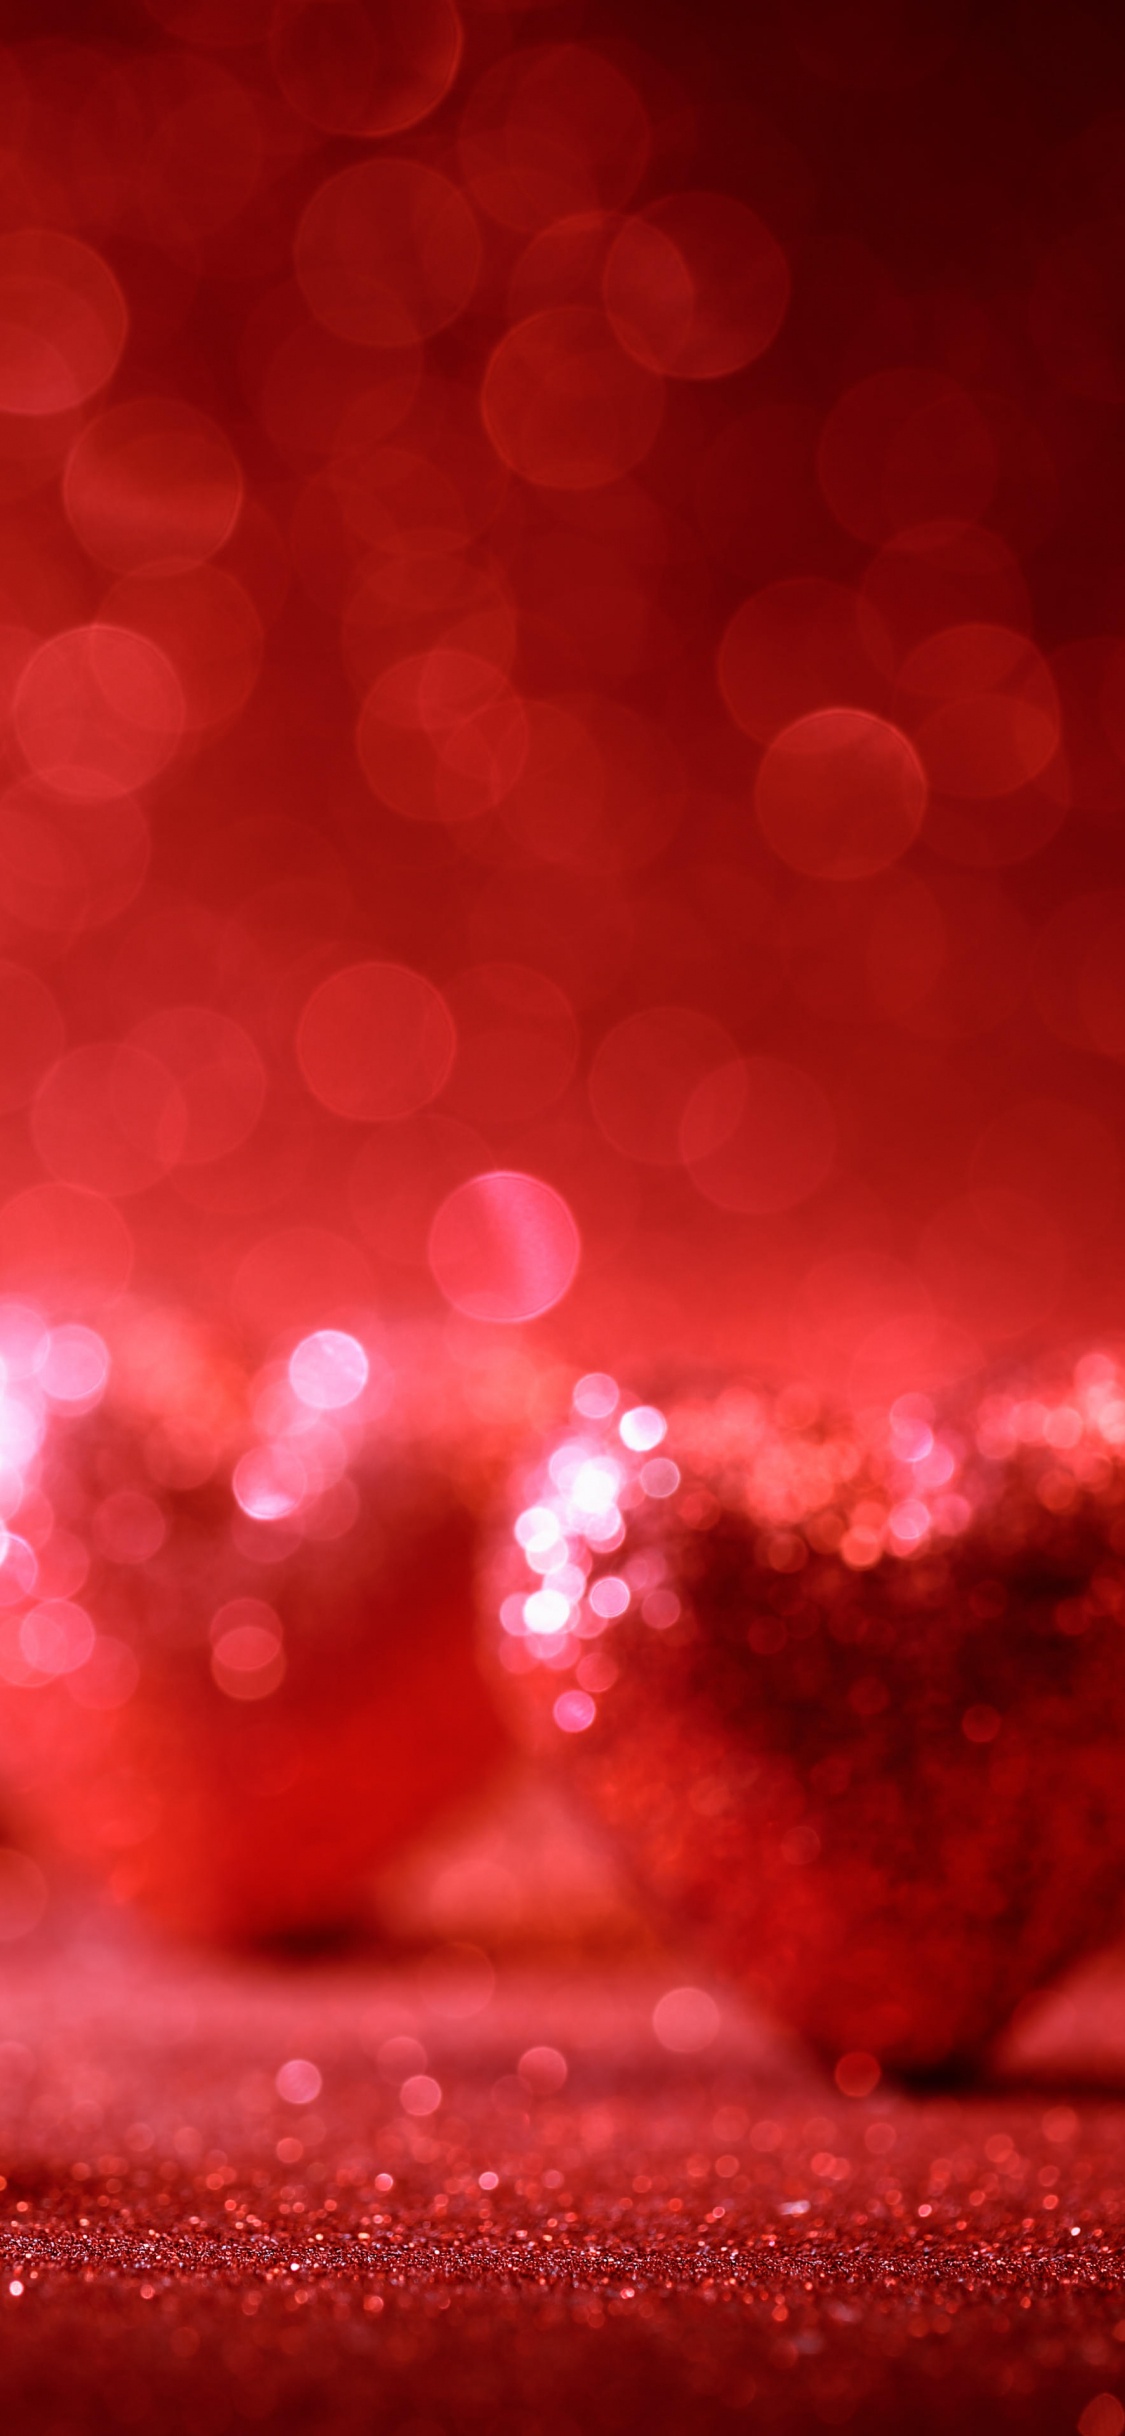 Valentines Day, Heart, Red, Love, Romance. Wallpaper in 1125x2436 Resolution